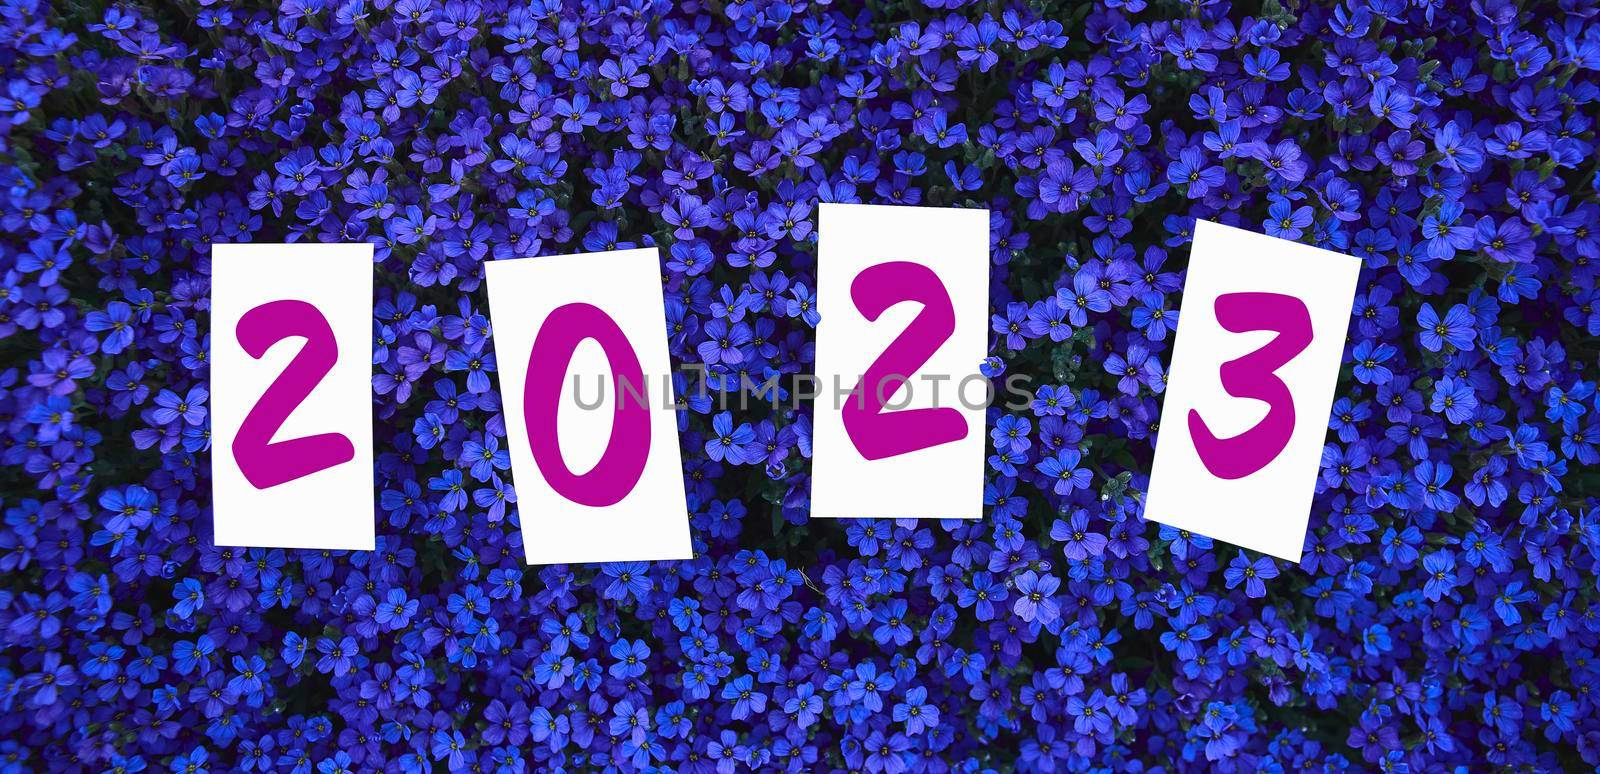 Happy New Year 2023. New year background concept, blue flowers with 2023 year cards on blue background.